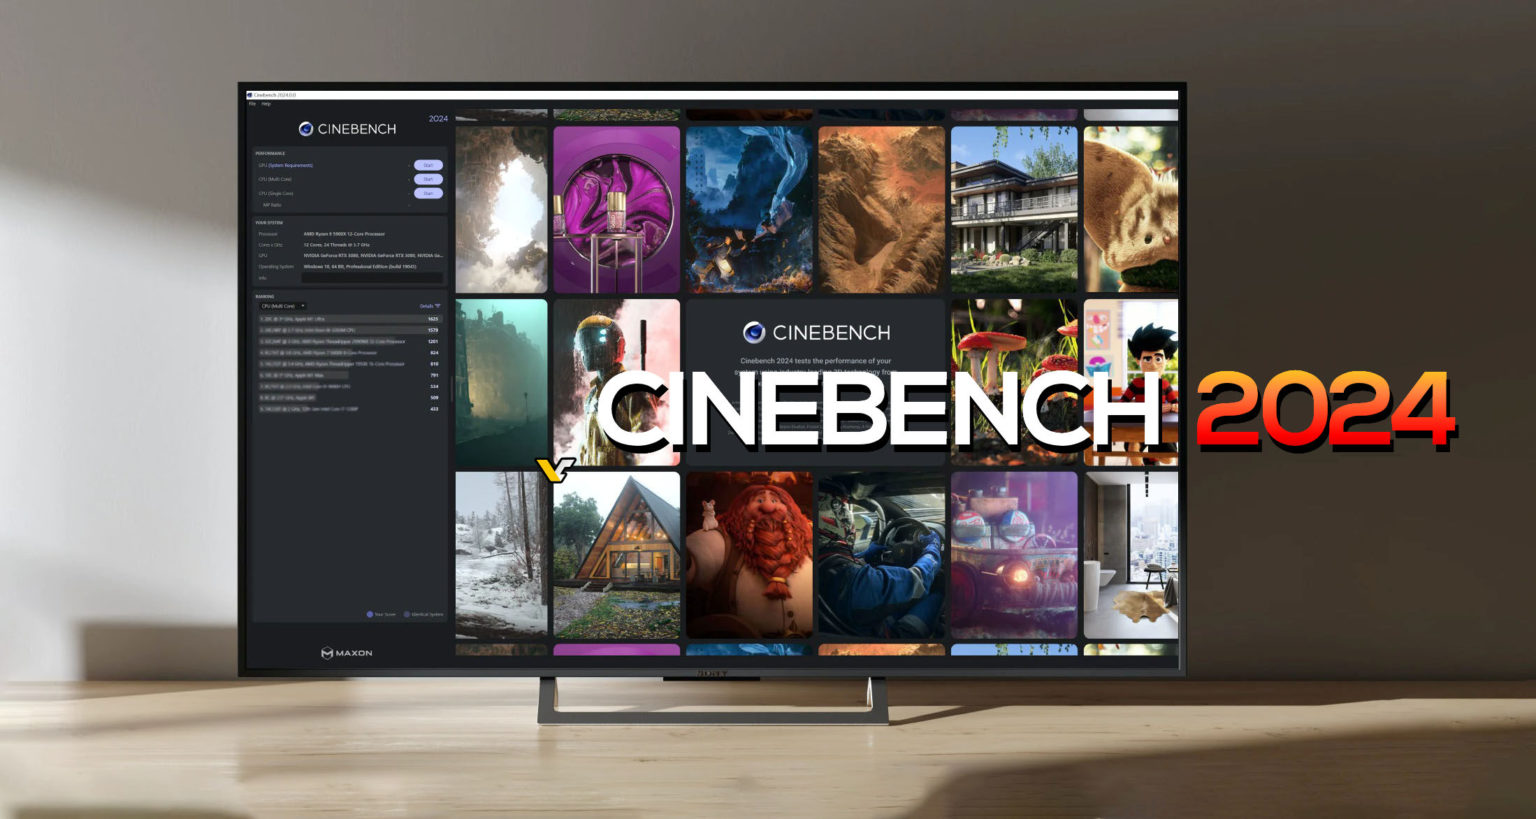 Maxon launches Cinebench 2024 with new rendering engine and GPU